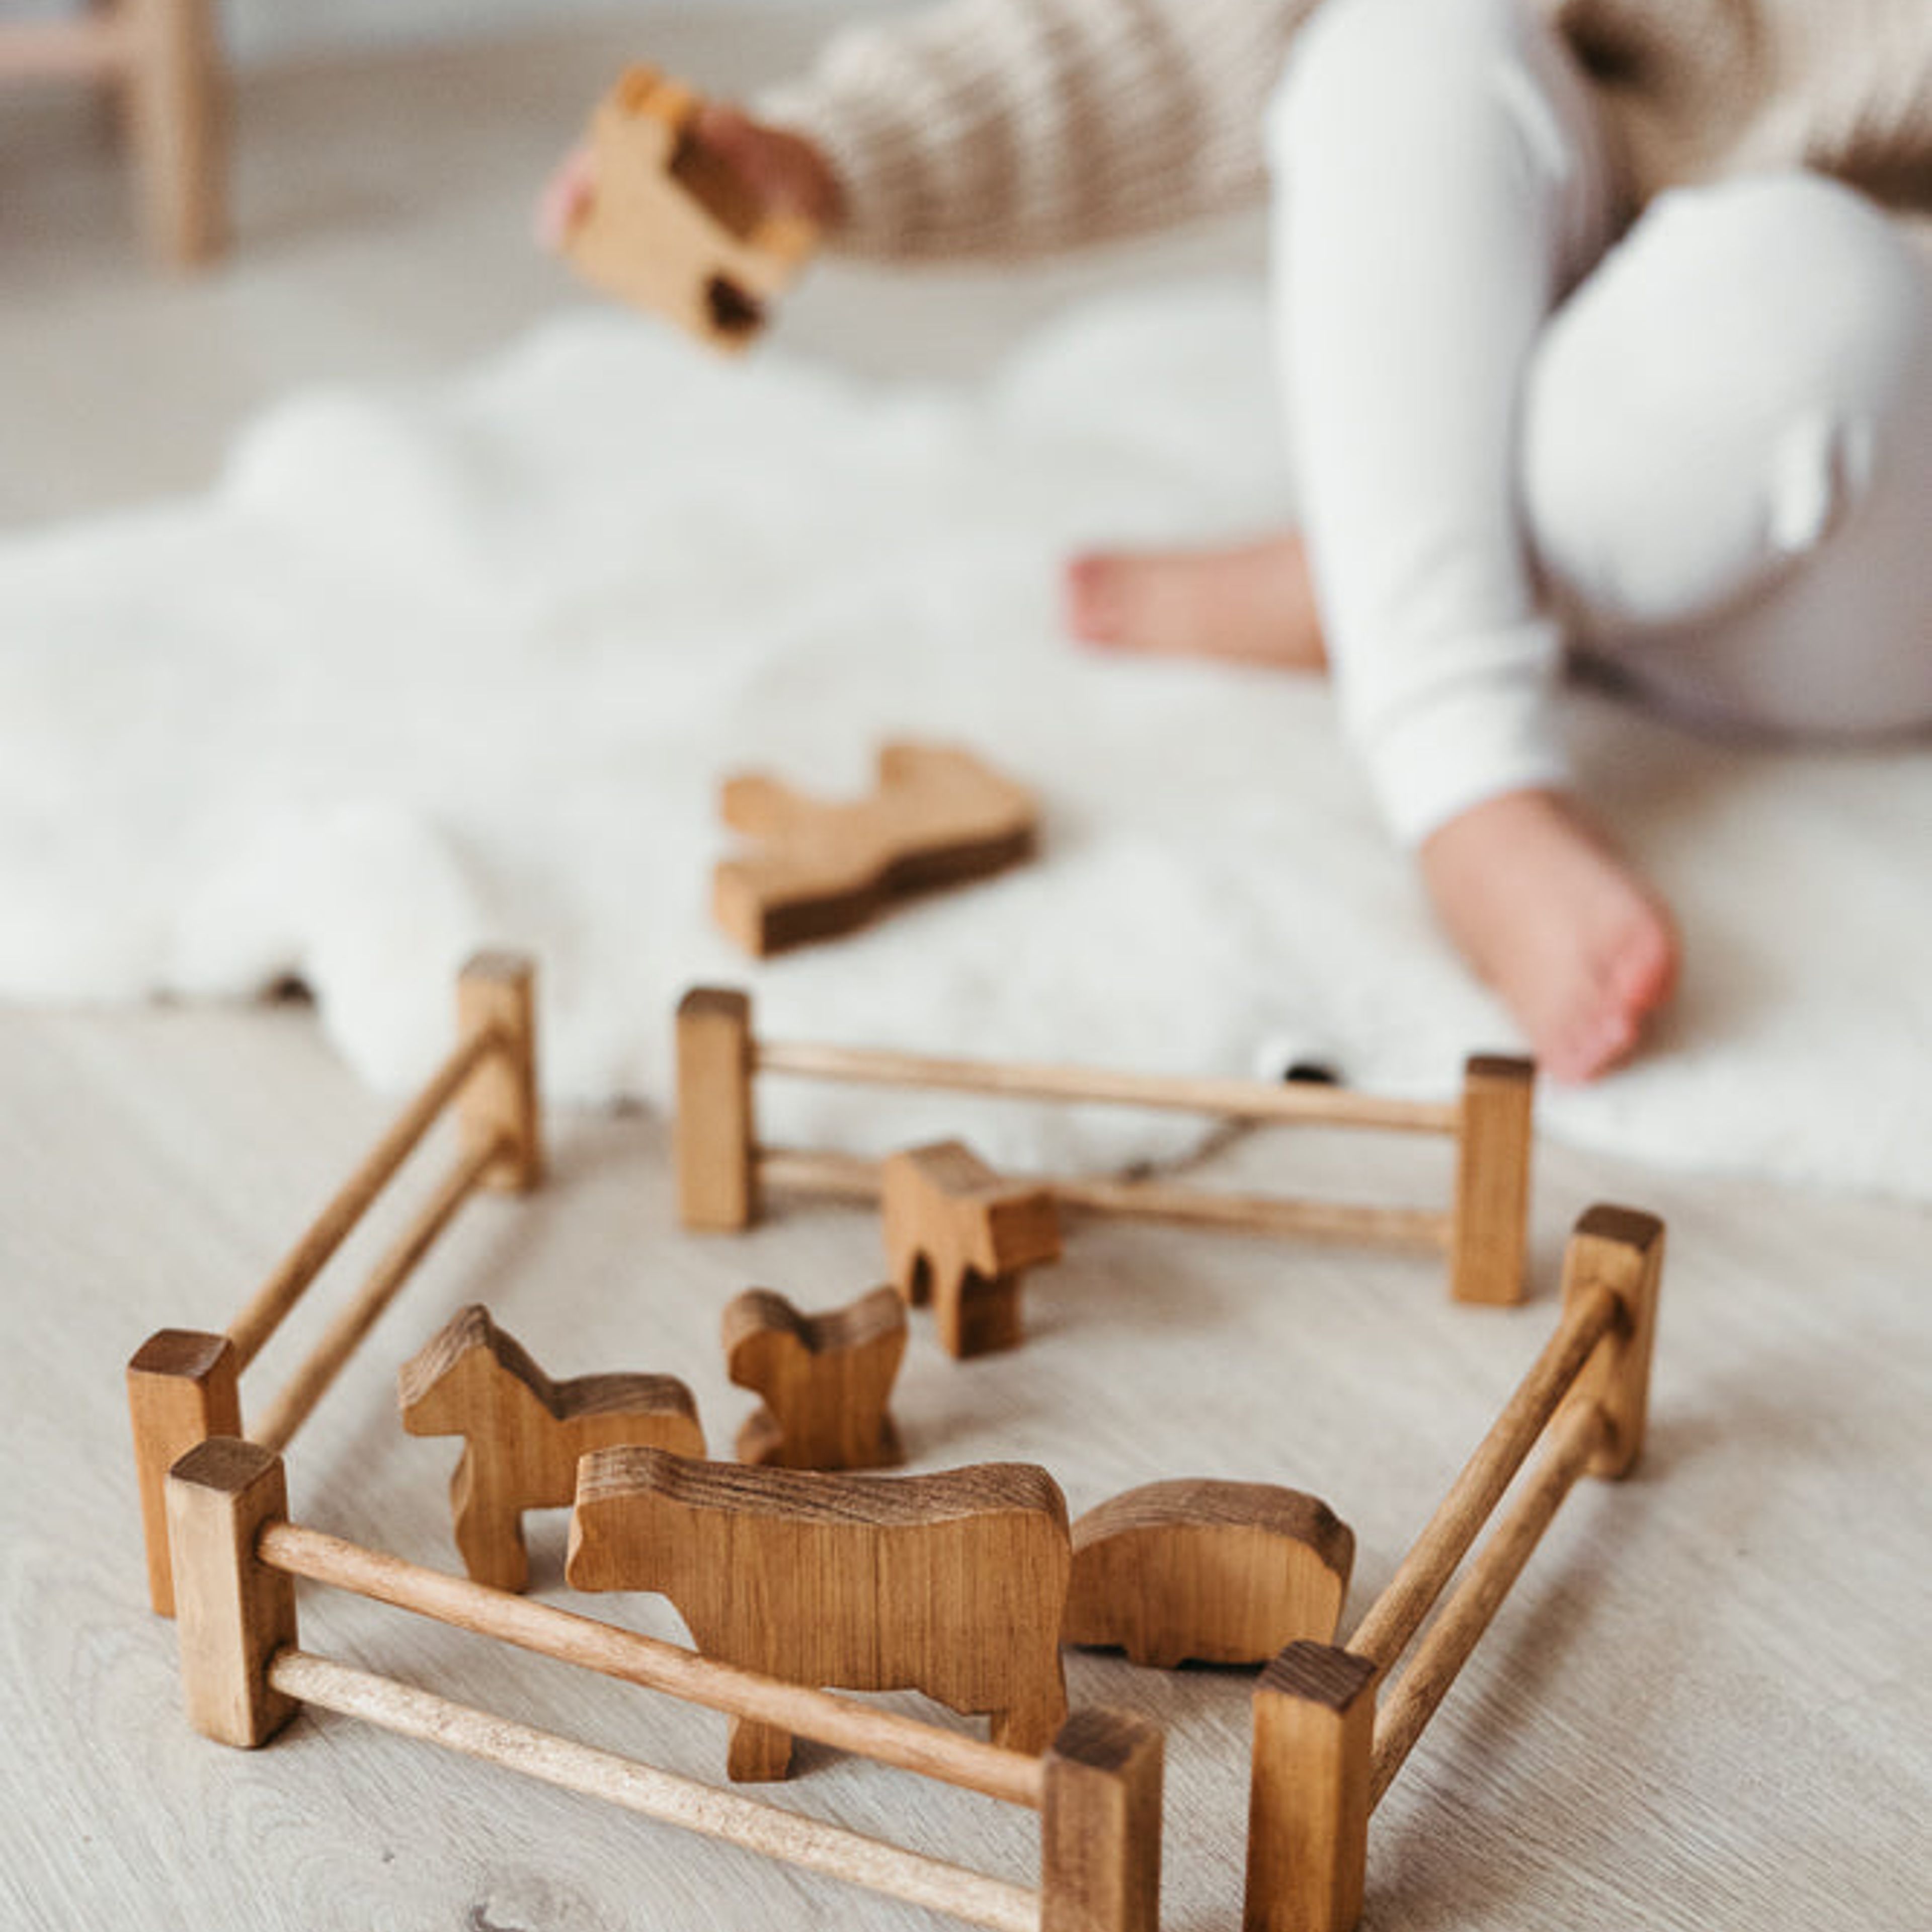 The Wooden Farm Animals with Fencing